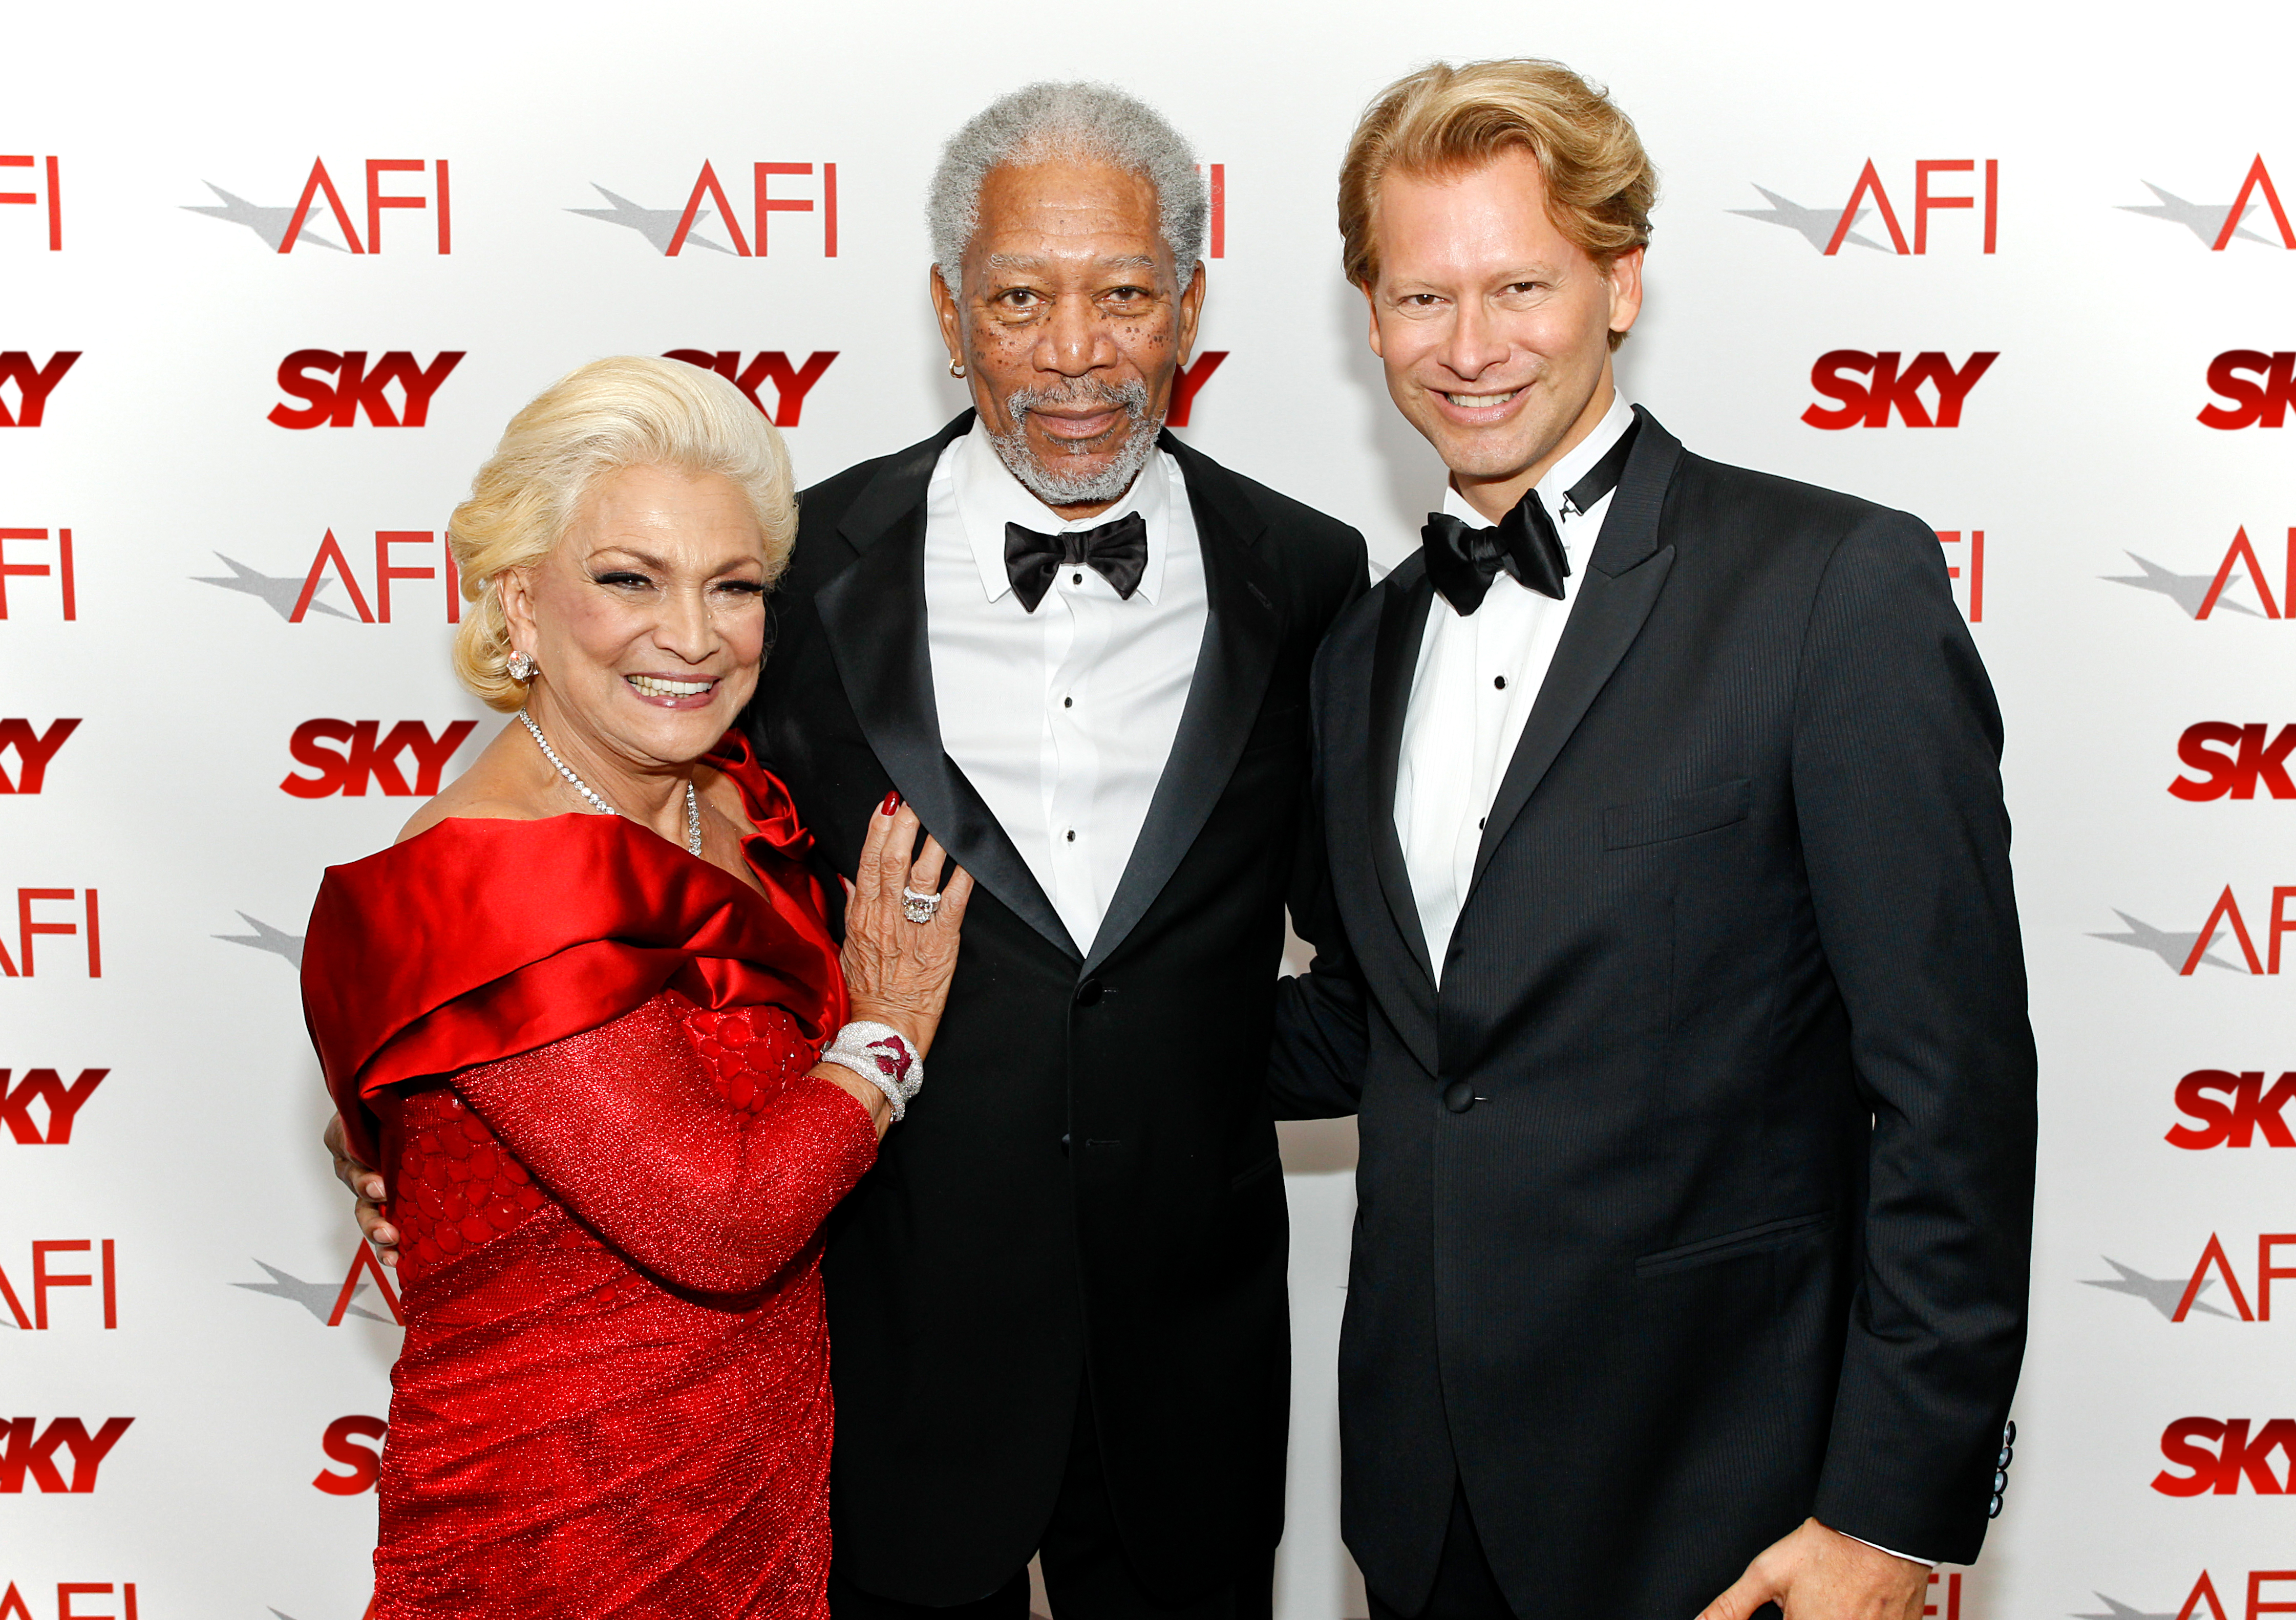 Marcello Coltro and his special guest Hebe Camargo meet with Morgan Freeman at the 39th AFI Life Achievement Award in Los Angeles